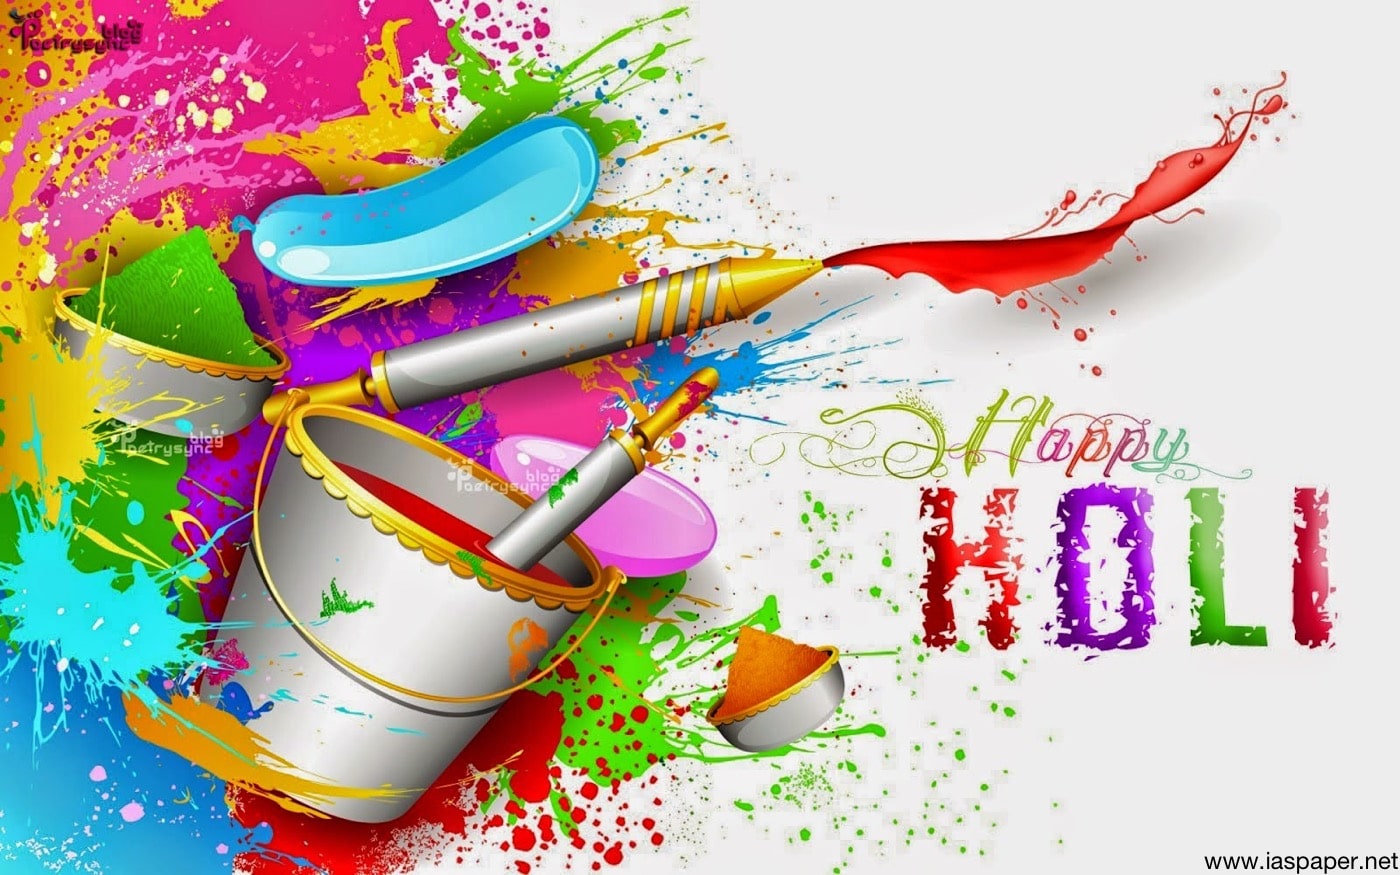 Happy Holi 2018 Wallpaper Photo Image Picture - Background Holi Image Png - HD Wallpaper 